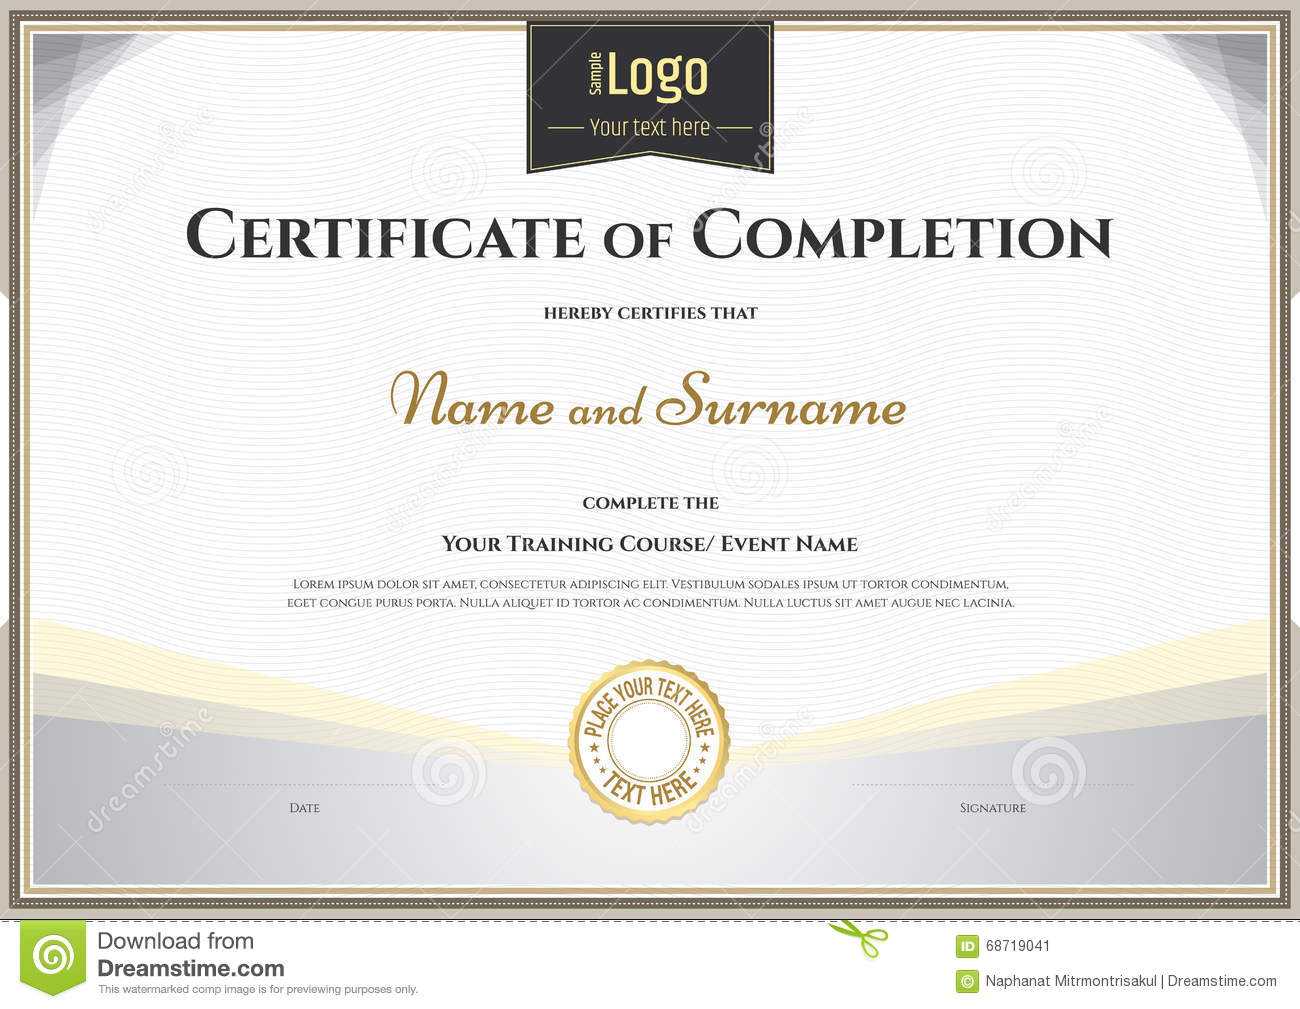 Certificate Of Completion Template In Vector For Achievement Within Blank Certificate Of Achievement Template